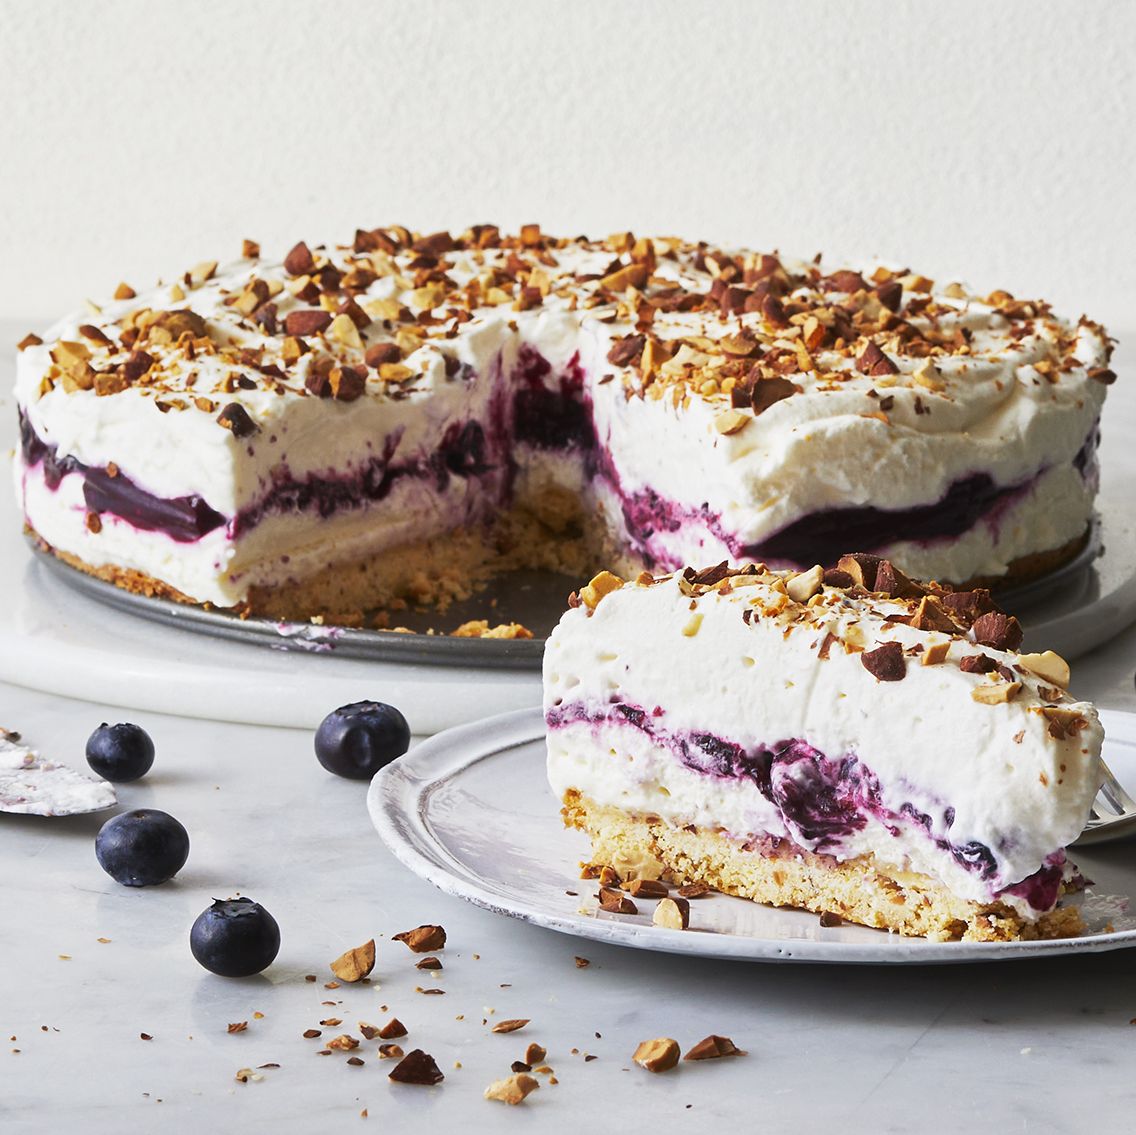 Homemade Filling Takes This Blueberry Surprise To The Next Level